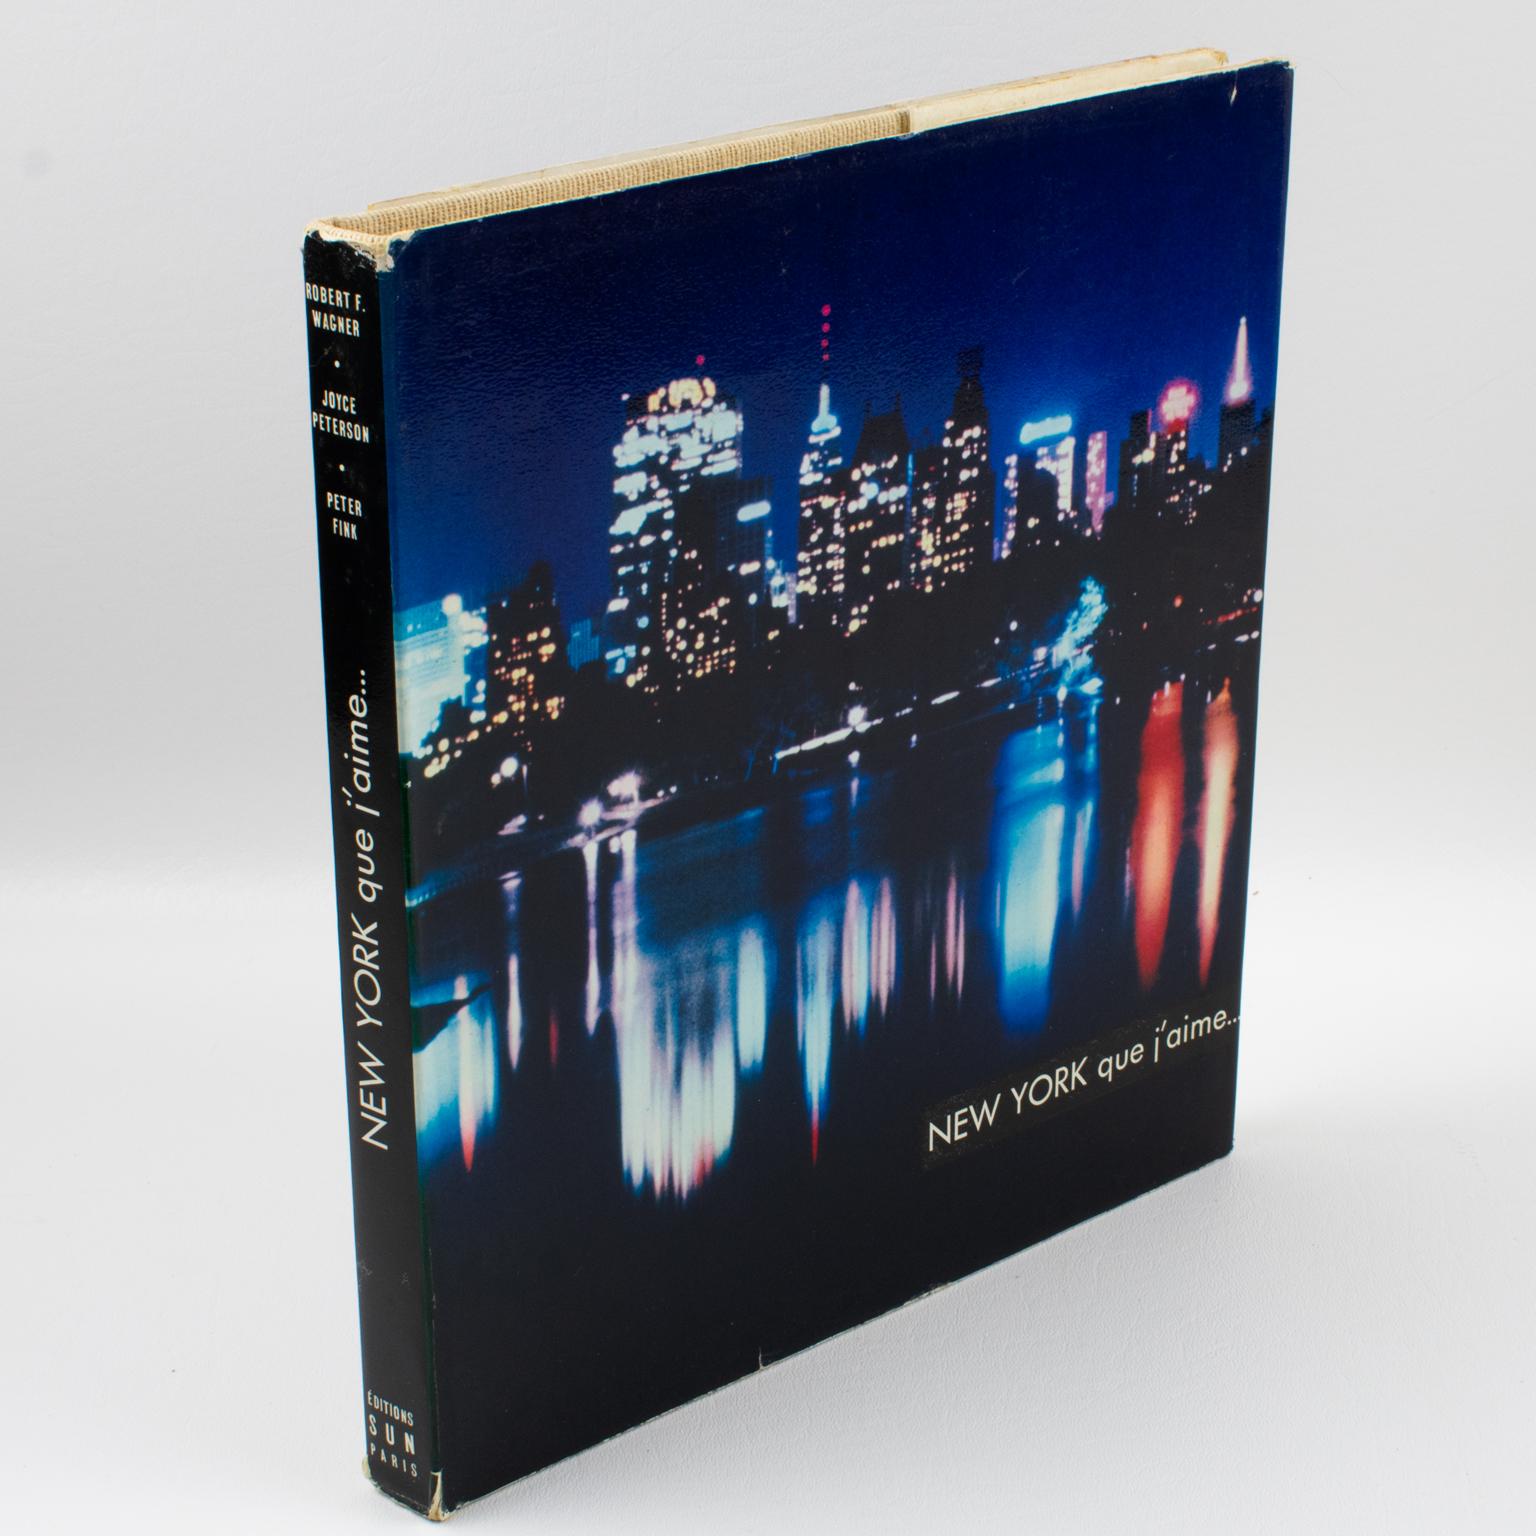 New York Que J'aime (New York I love), a French book by Robert F. Wagner (New York Mayor). Text by Joyce Peterson, and Photographs by Peter Fink.
New York is undoubtedly the most dynamic and exciting metropolis but also the most elusive. It is a